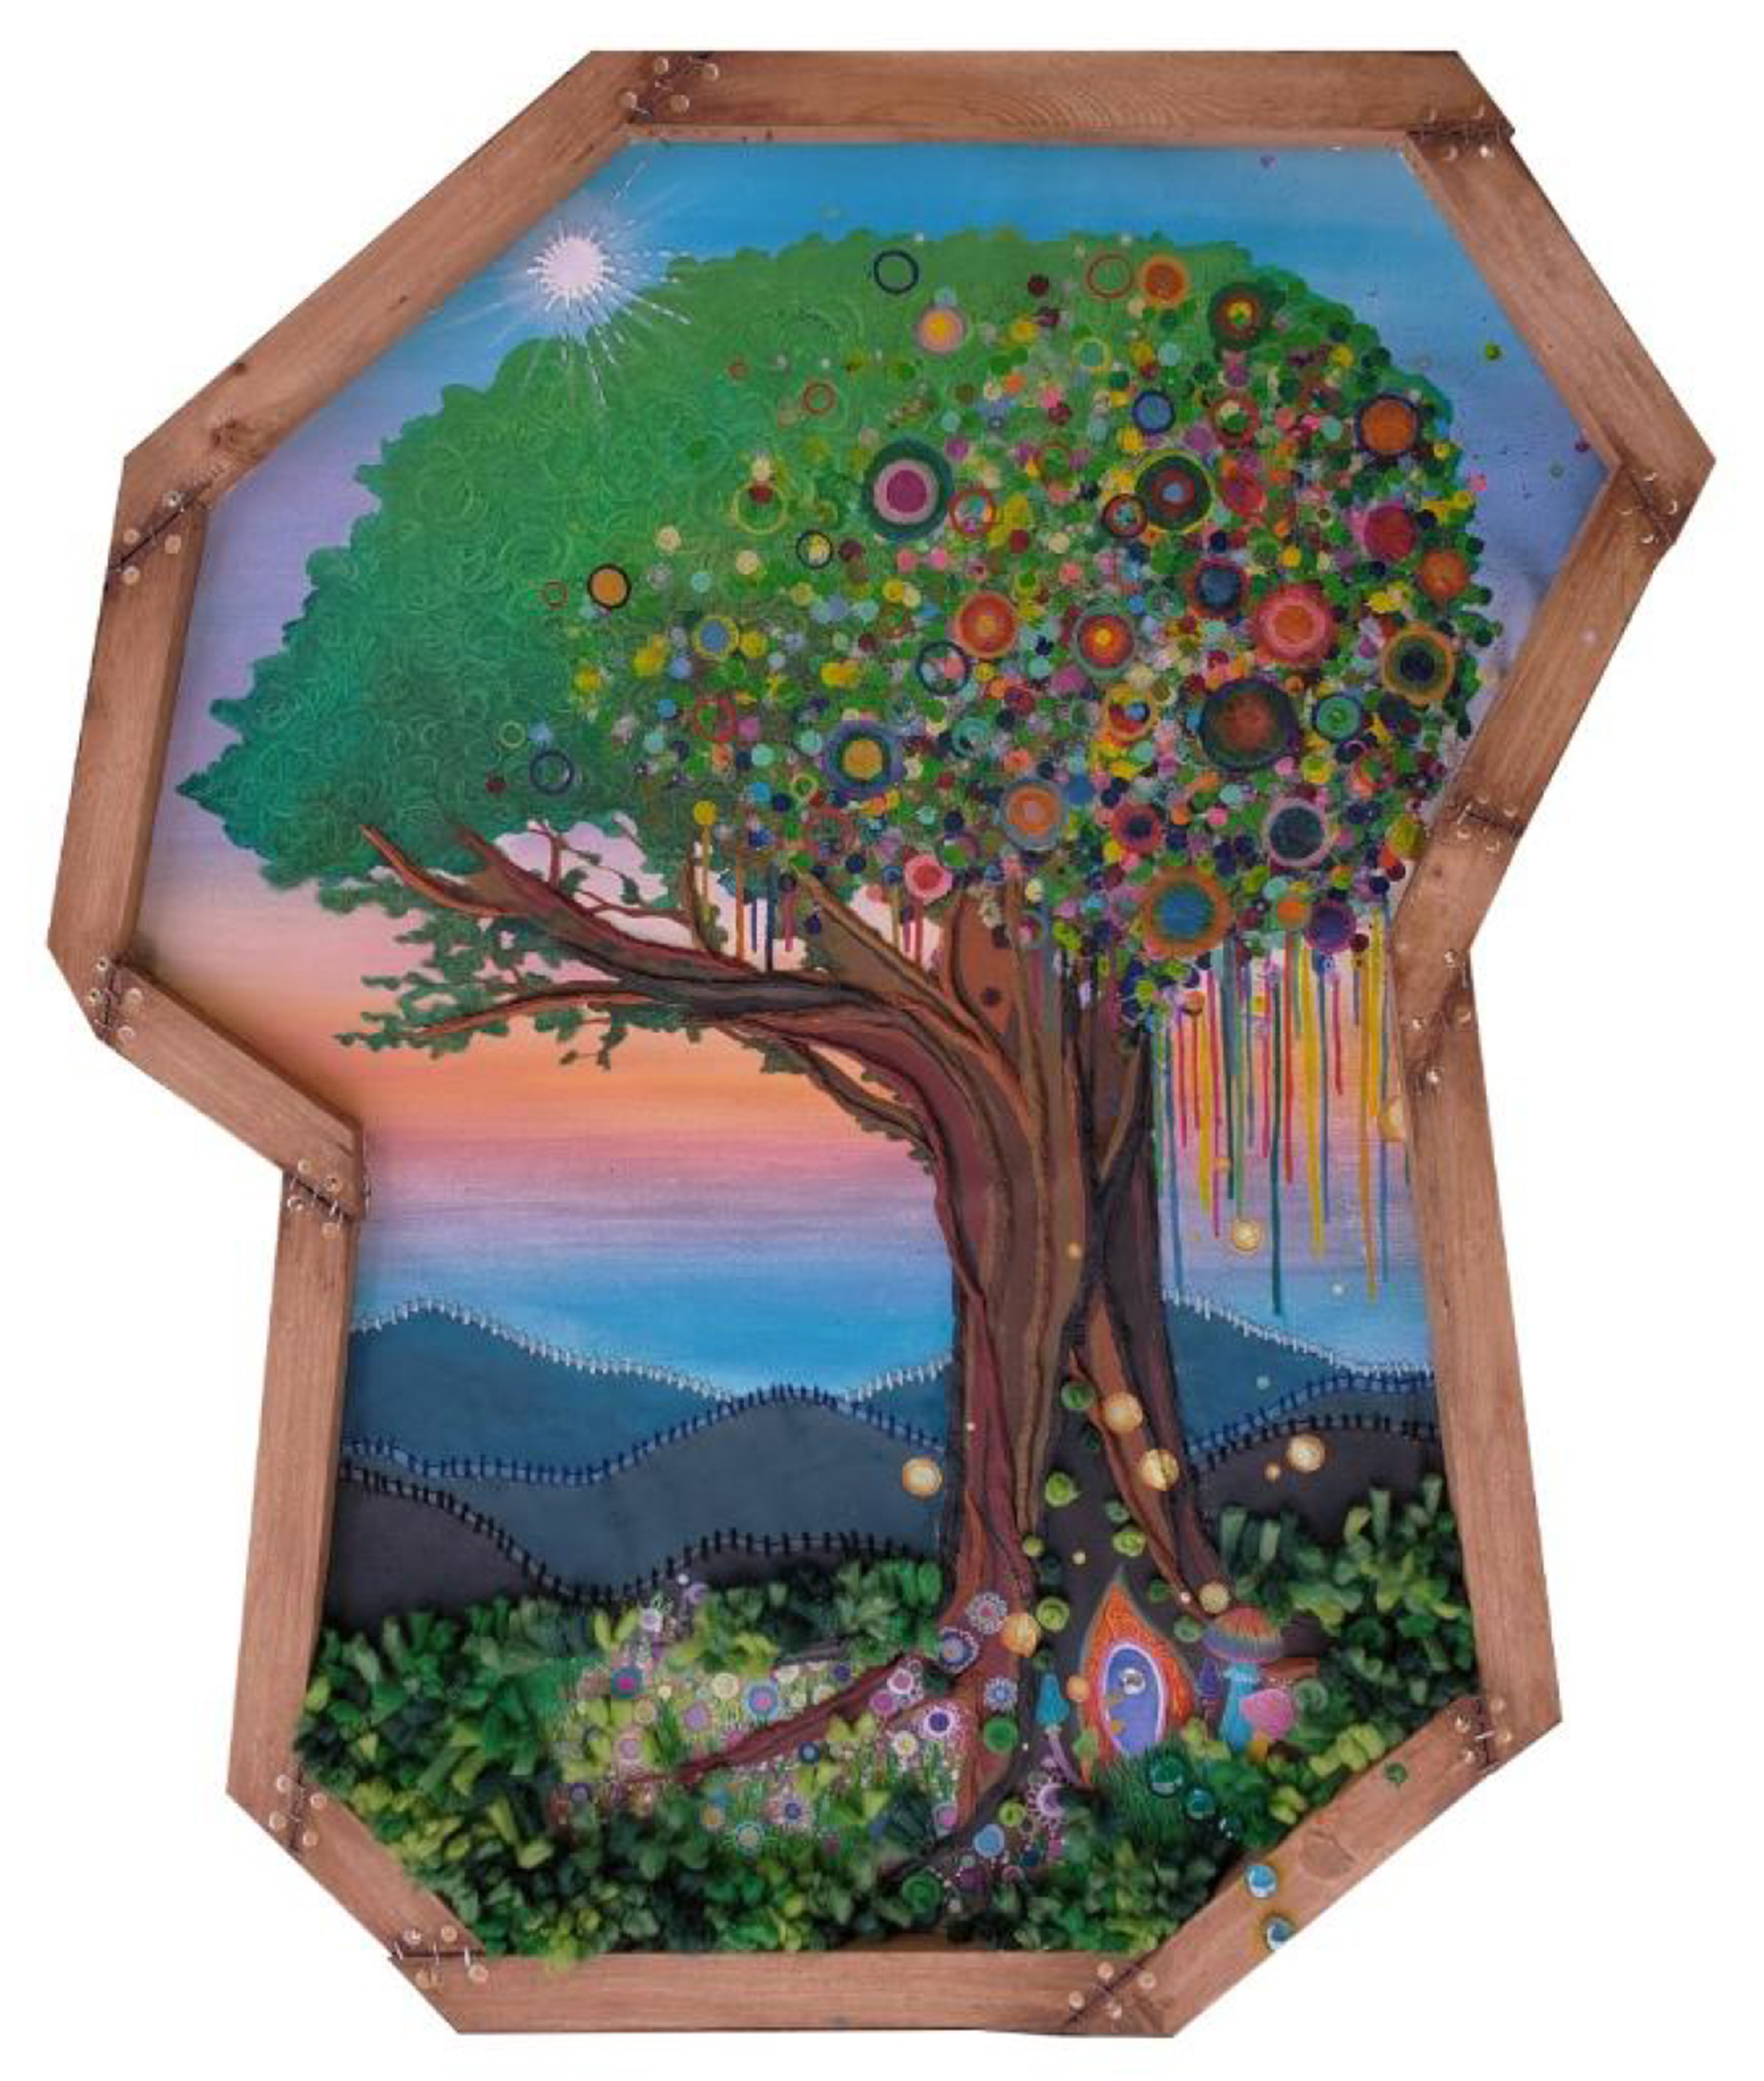 Painting of a tree with circles in various colors in an abstract frame